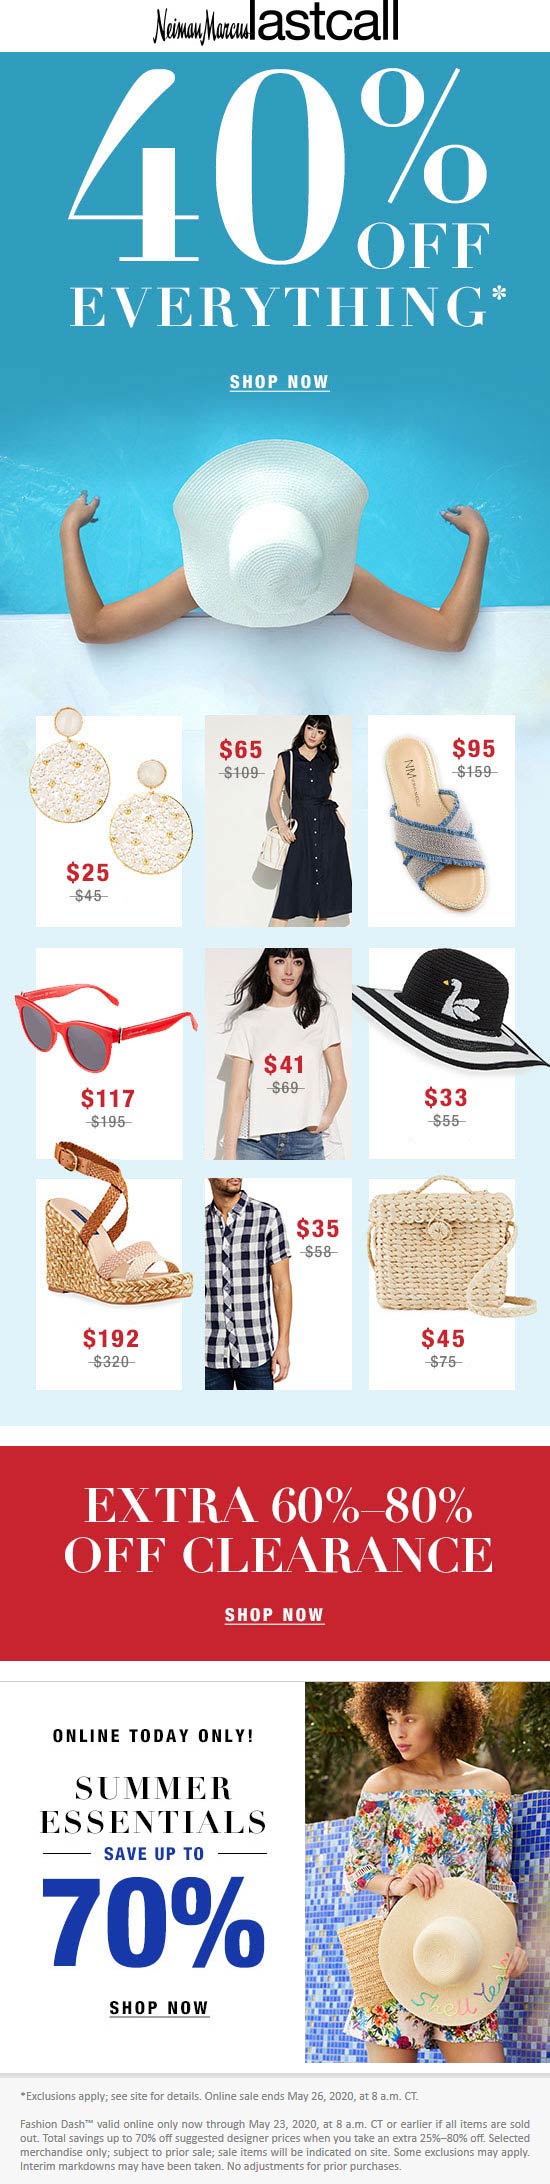 Last Call stores Coupon  40% off everything at Neiman Marcus Last Call #lastcall